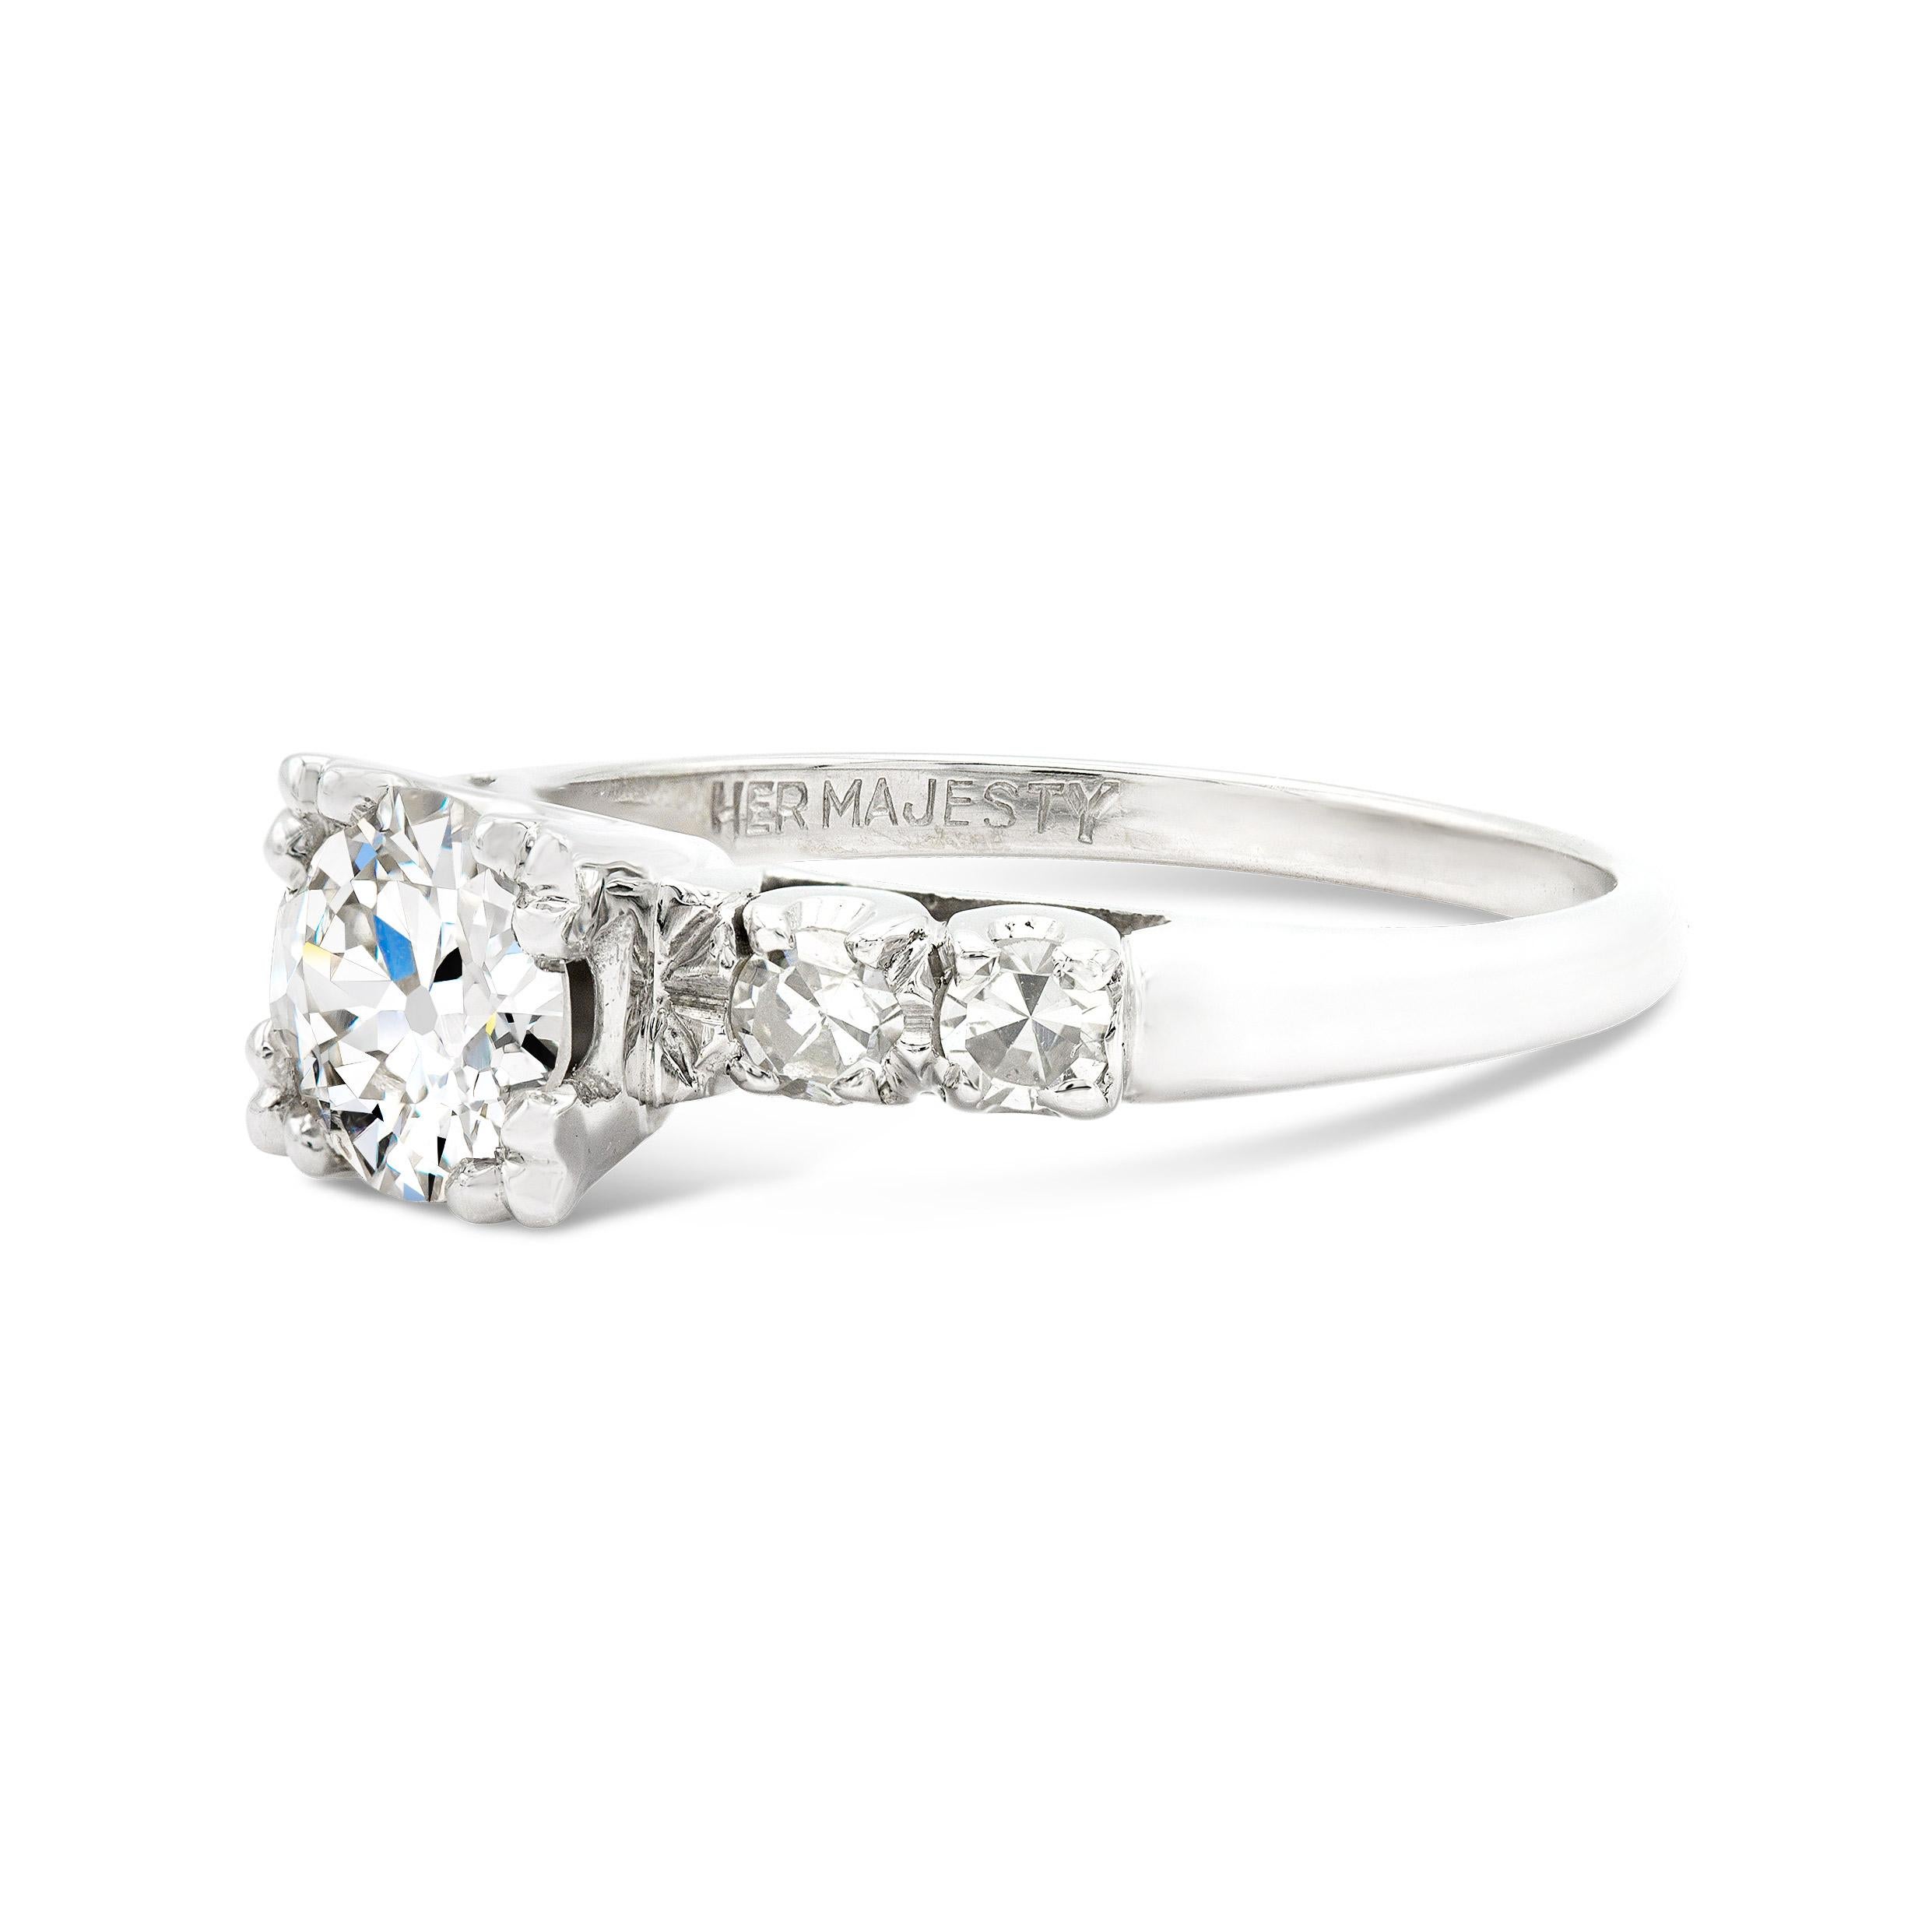 This piece holds a special place in our heart. An icy white antique cut center steals the show on the deco-era engagement ring. At 0.75 carats with a large table and wide open culet, we can't stop staring. The accenting diamonds are just as bright